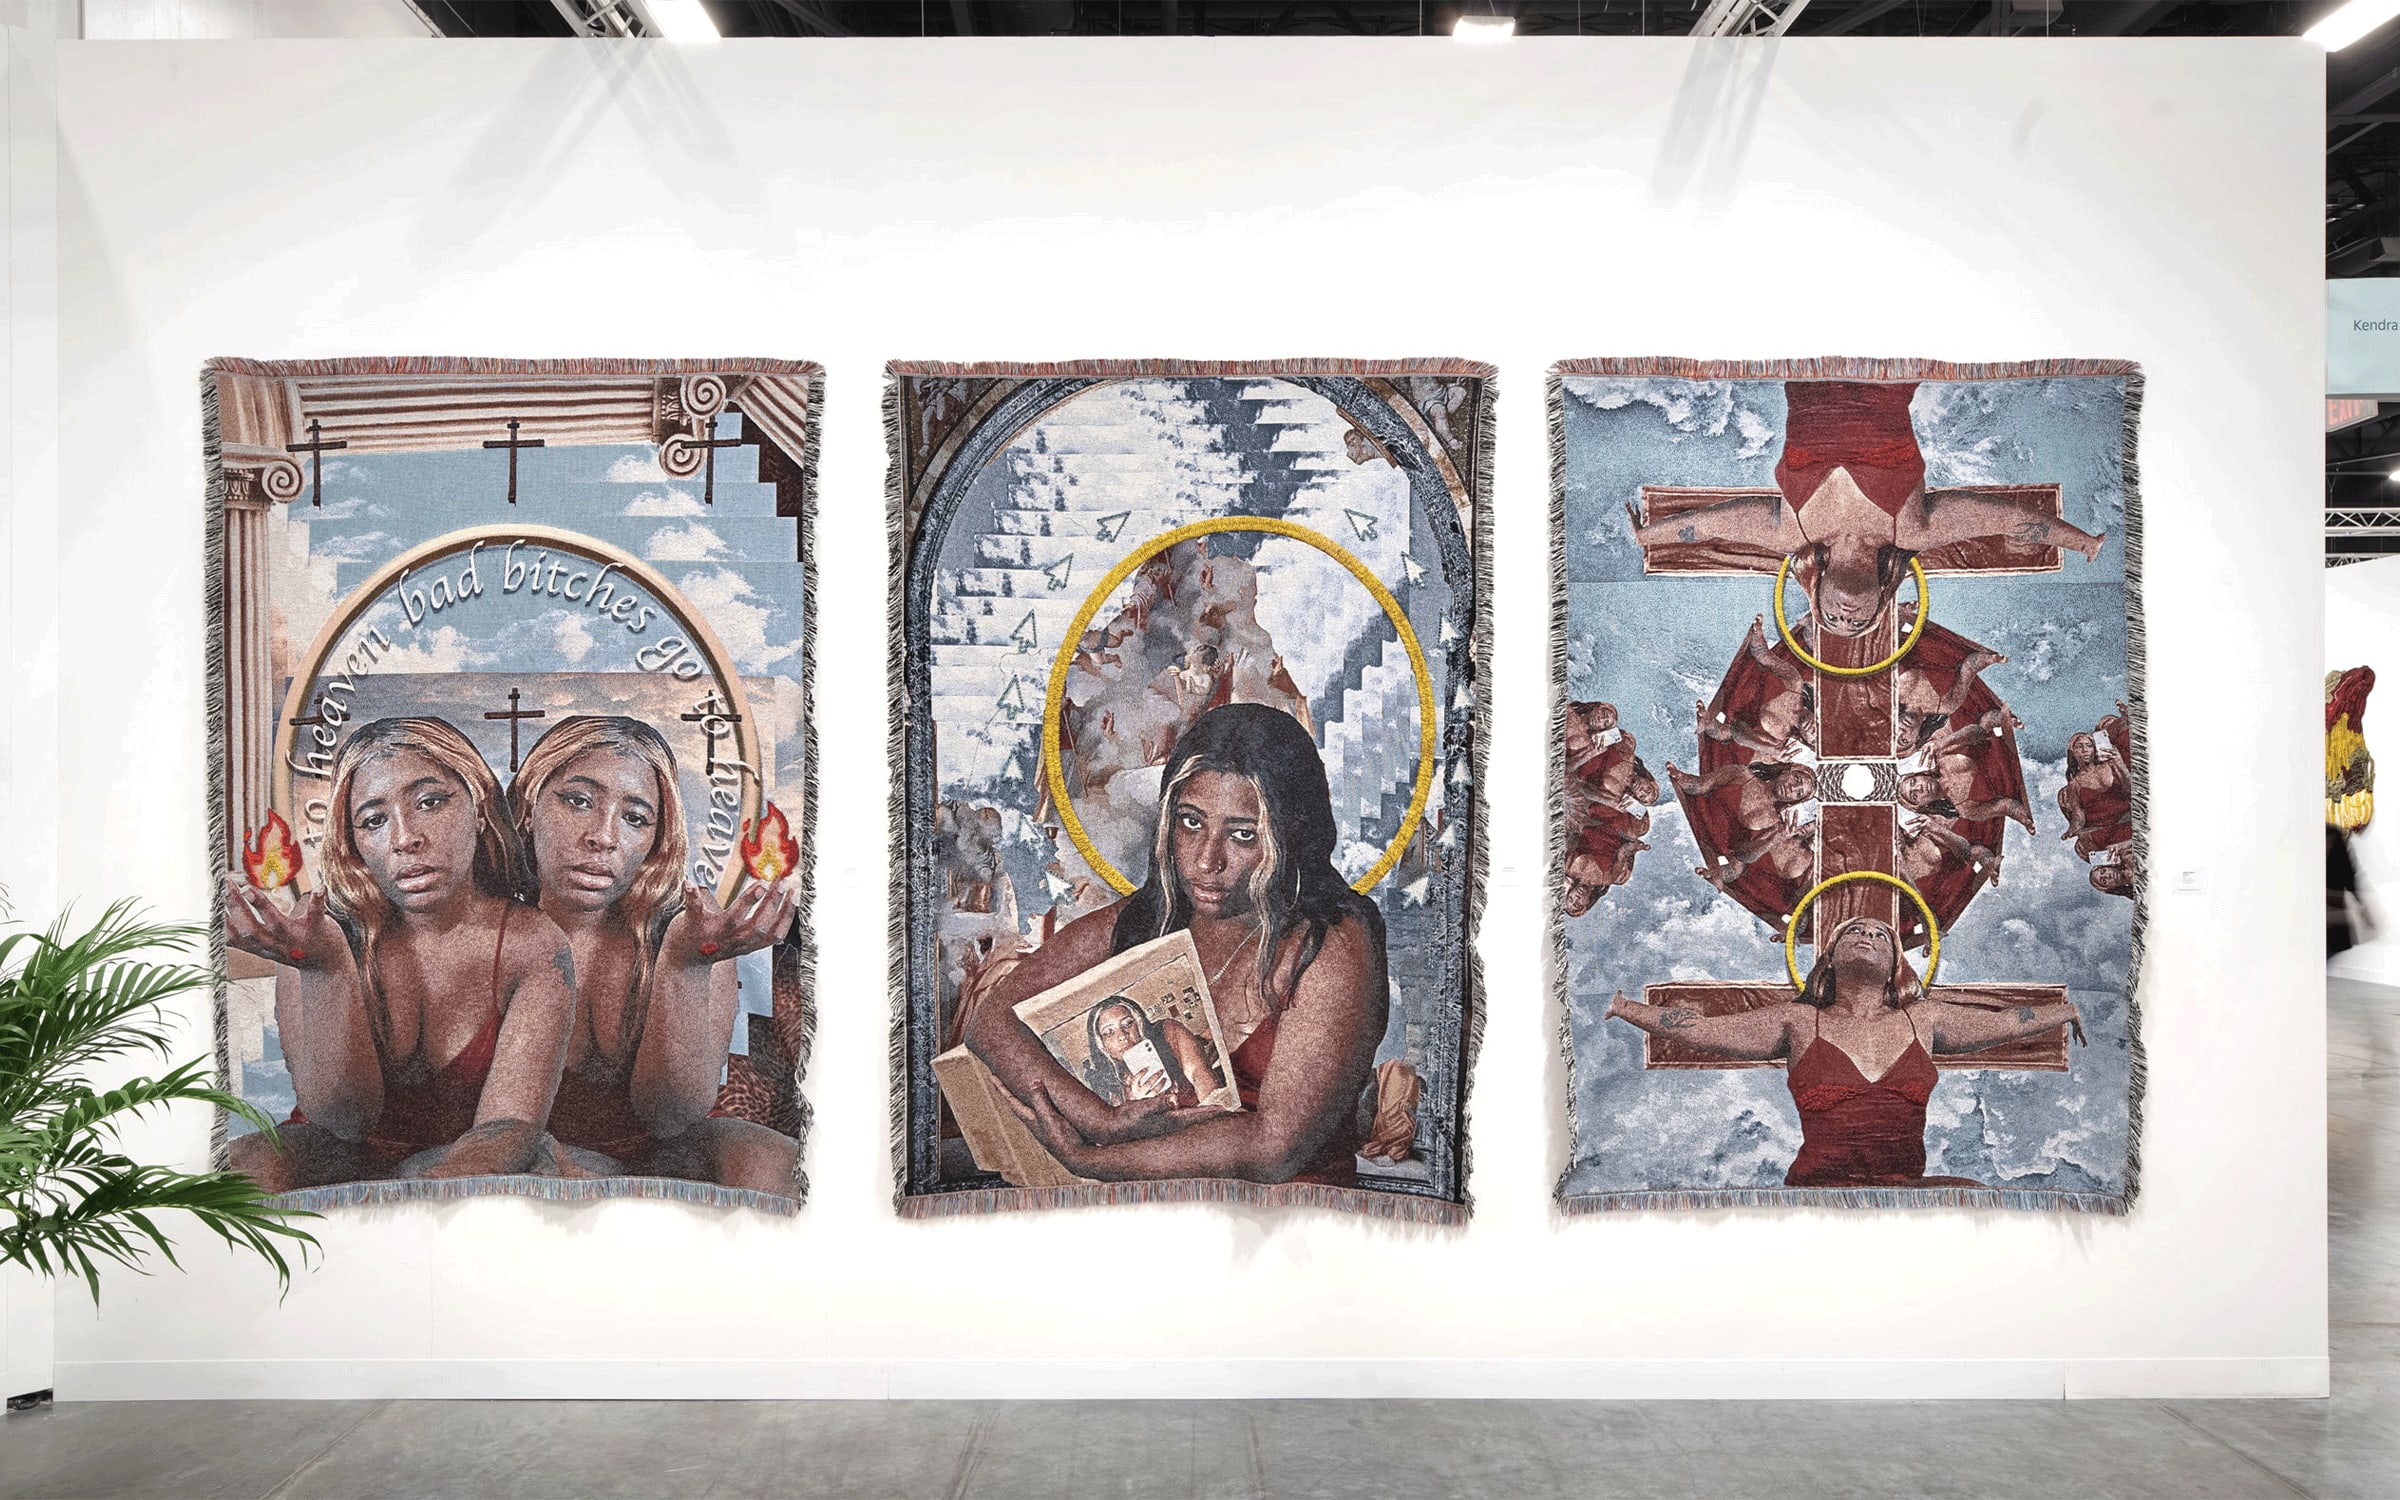 Installation view of Qualeasha Wood’s artworks in Kendra Jayne Patrick’s booth at Art Basel Miami Beach 2021.